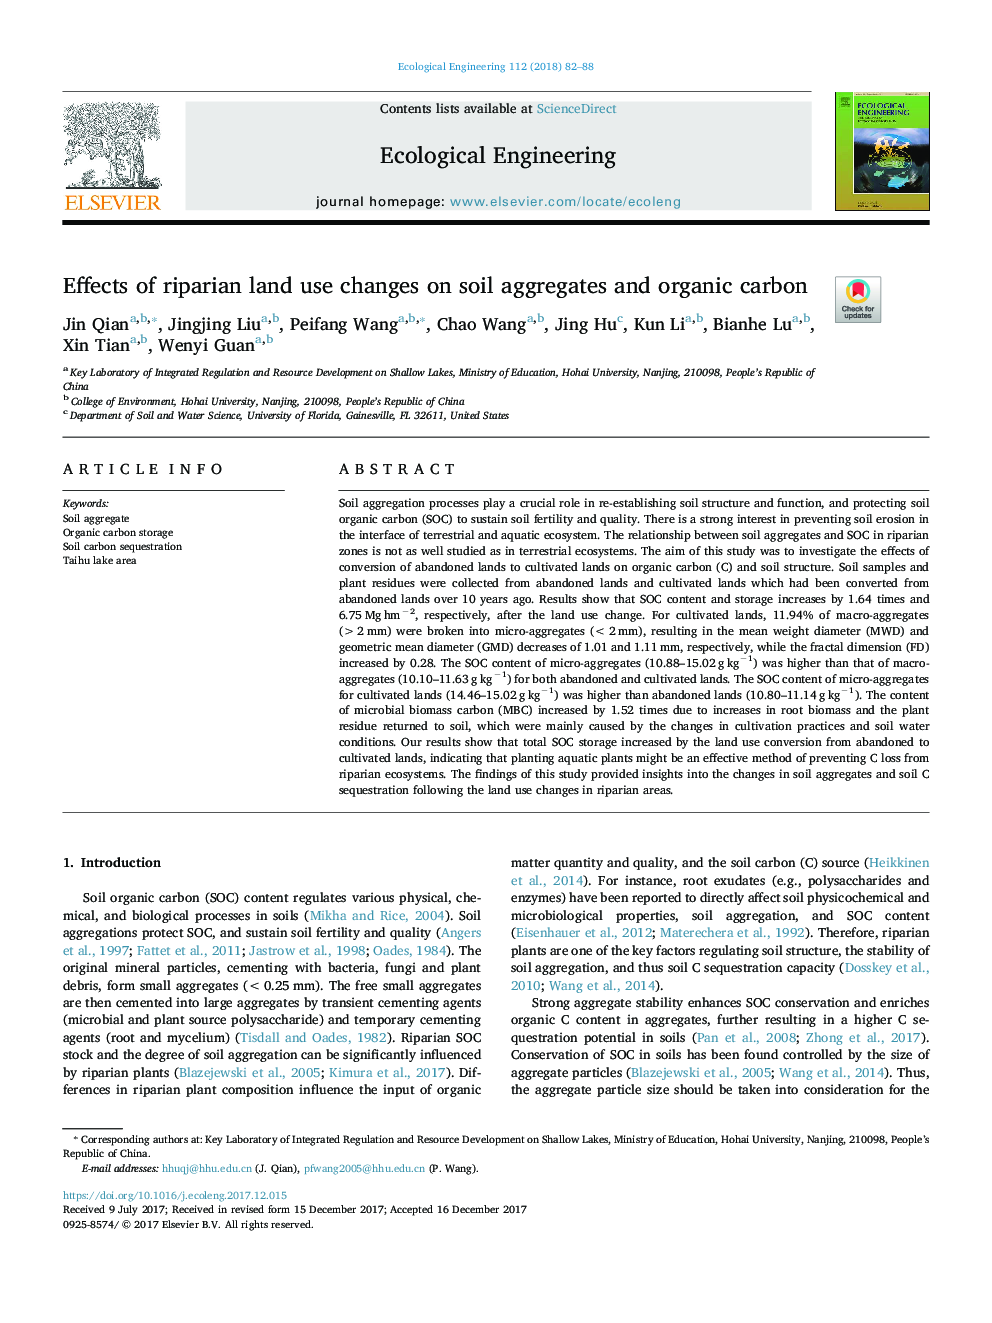 Effects of riparian land use changes on soil aggregates and organic carbon